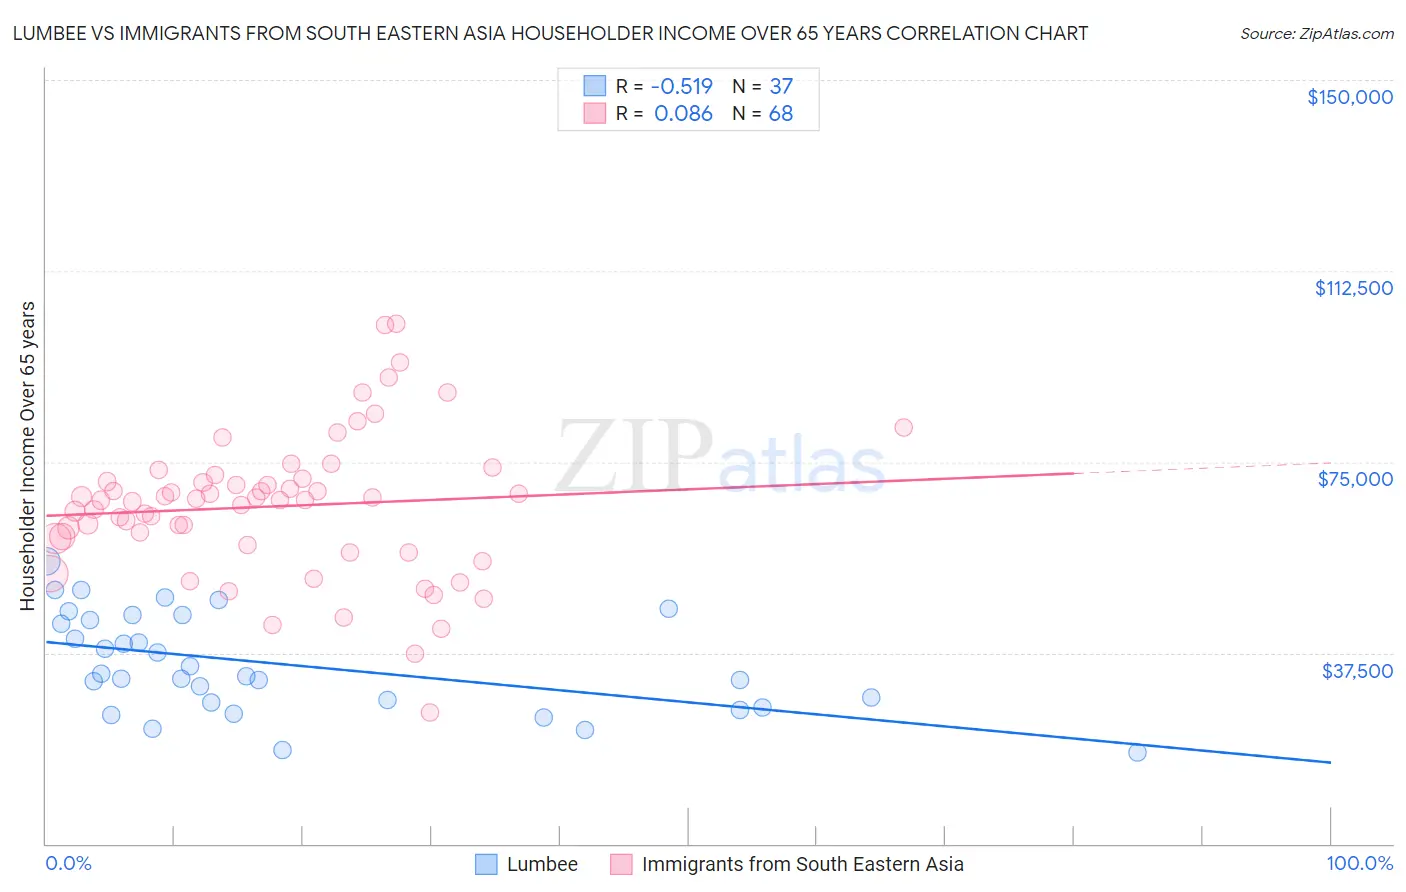 Lumbee vs Immigrants from South Eastern Asia Householder Income Over 65 years